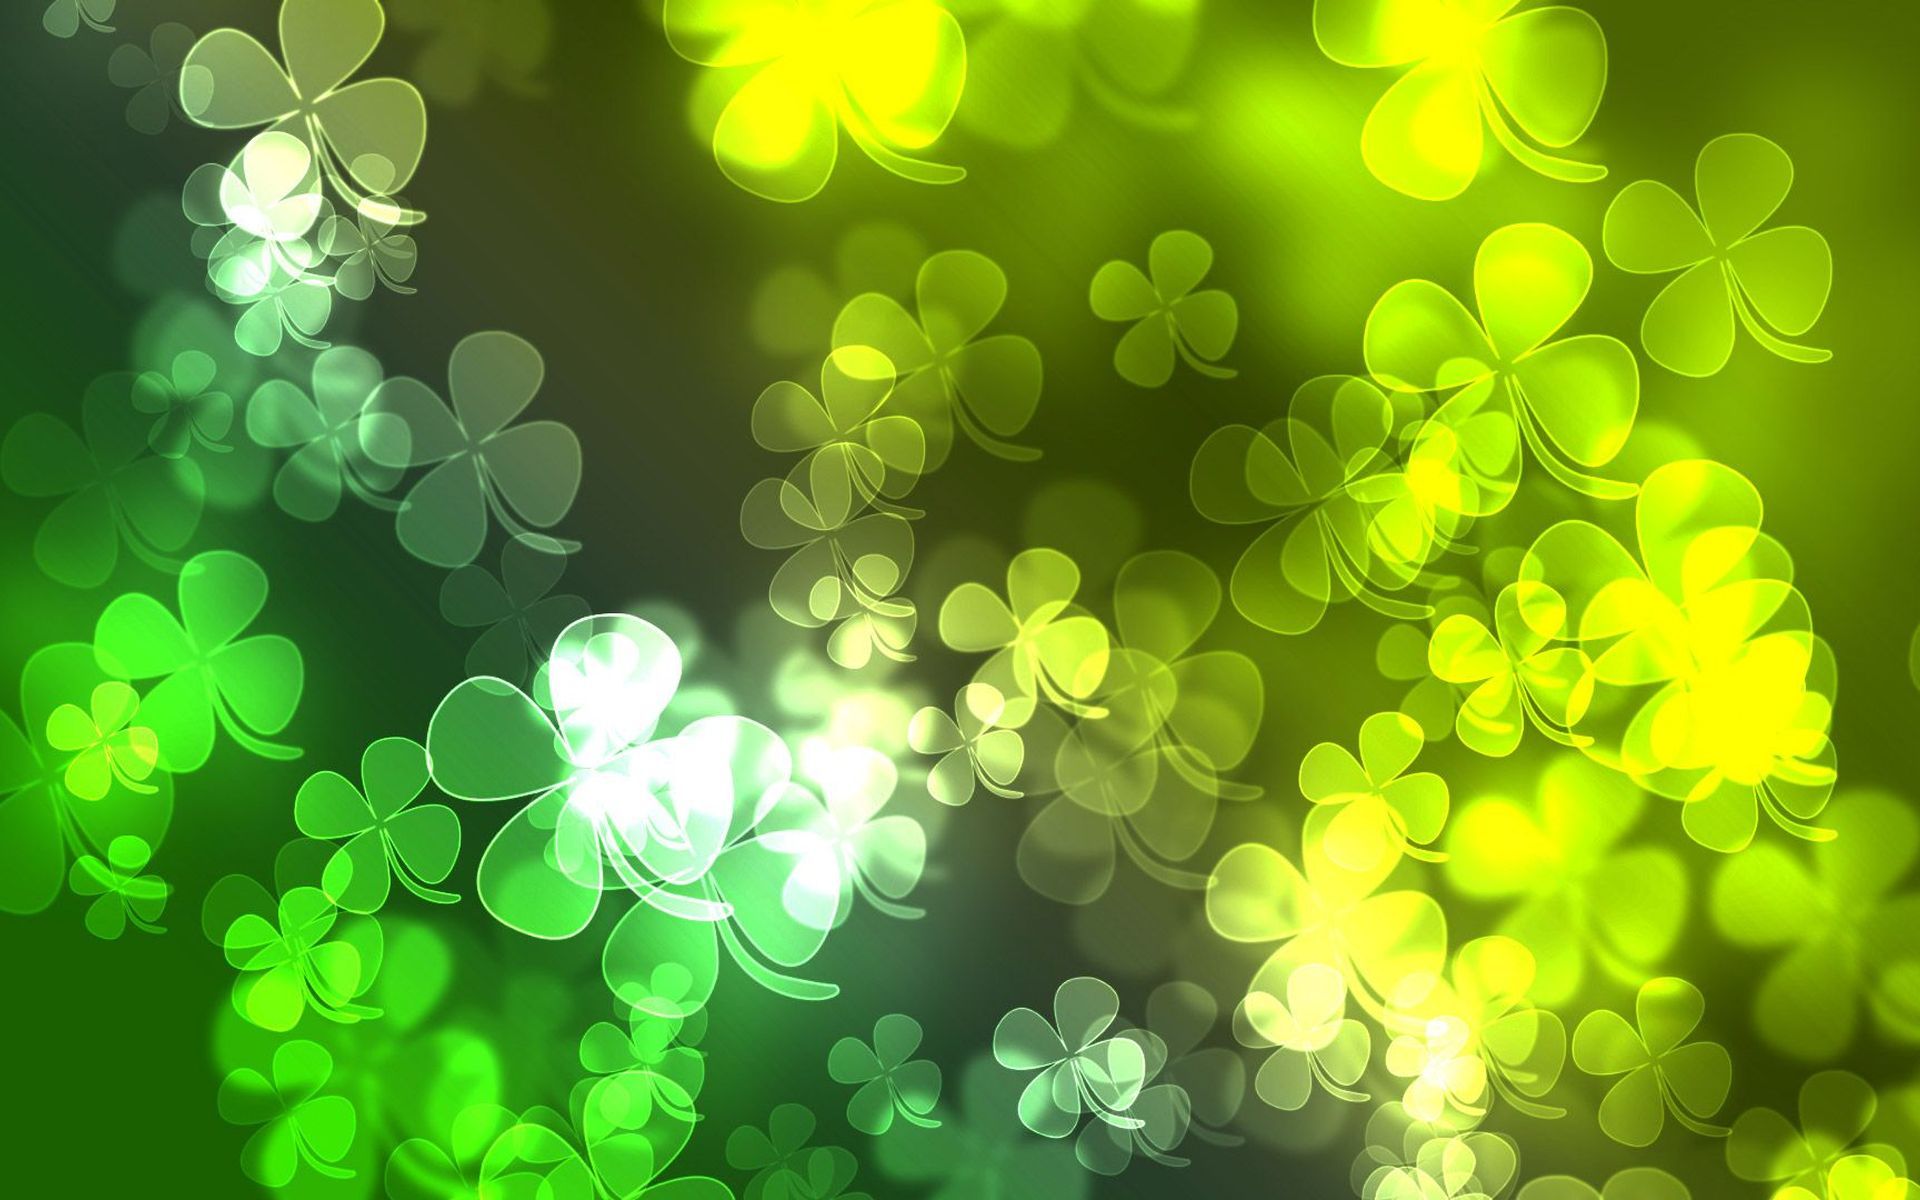 Happy St. Patrick's Day Wallpapers - Wallpaper Cave